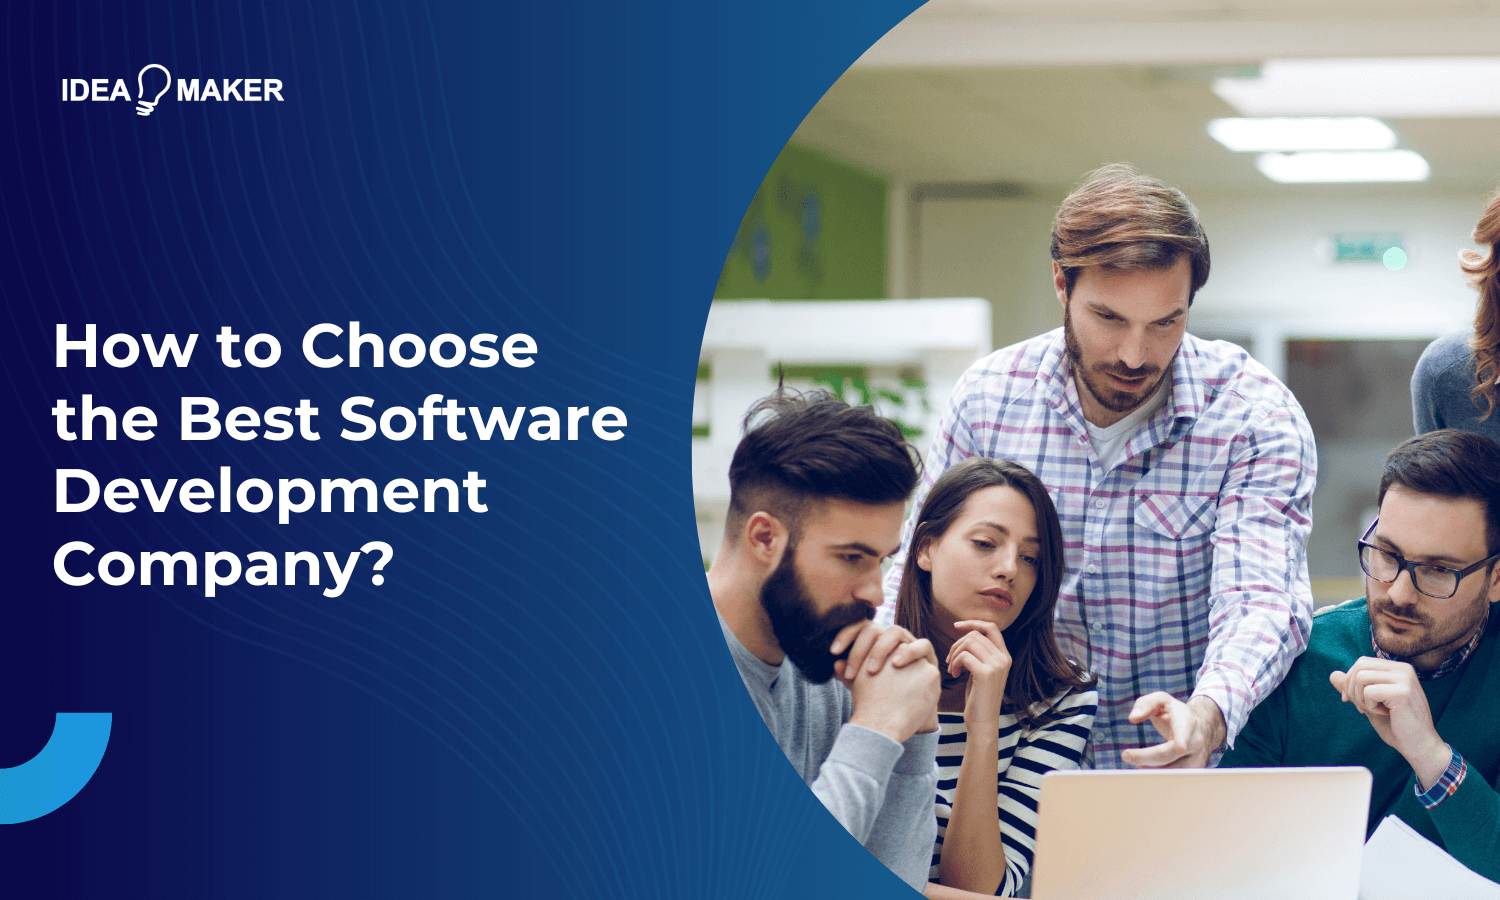 How to Choose the Best Software Development Company